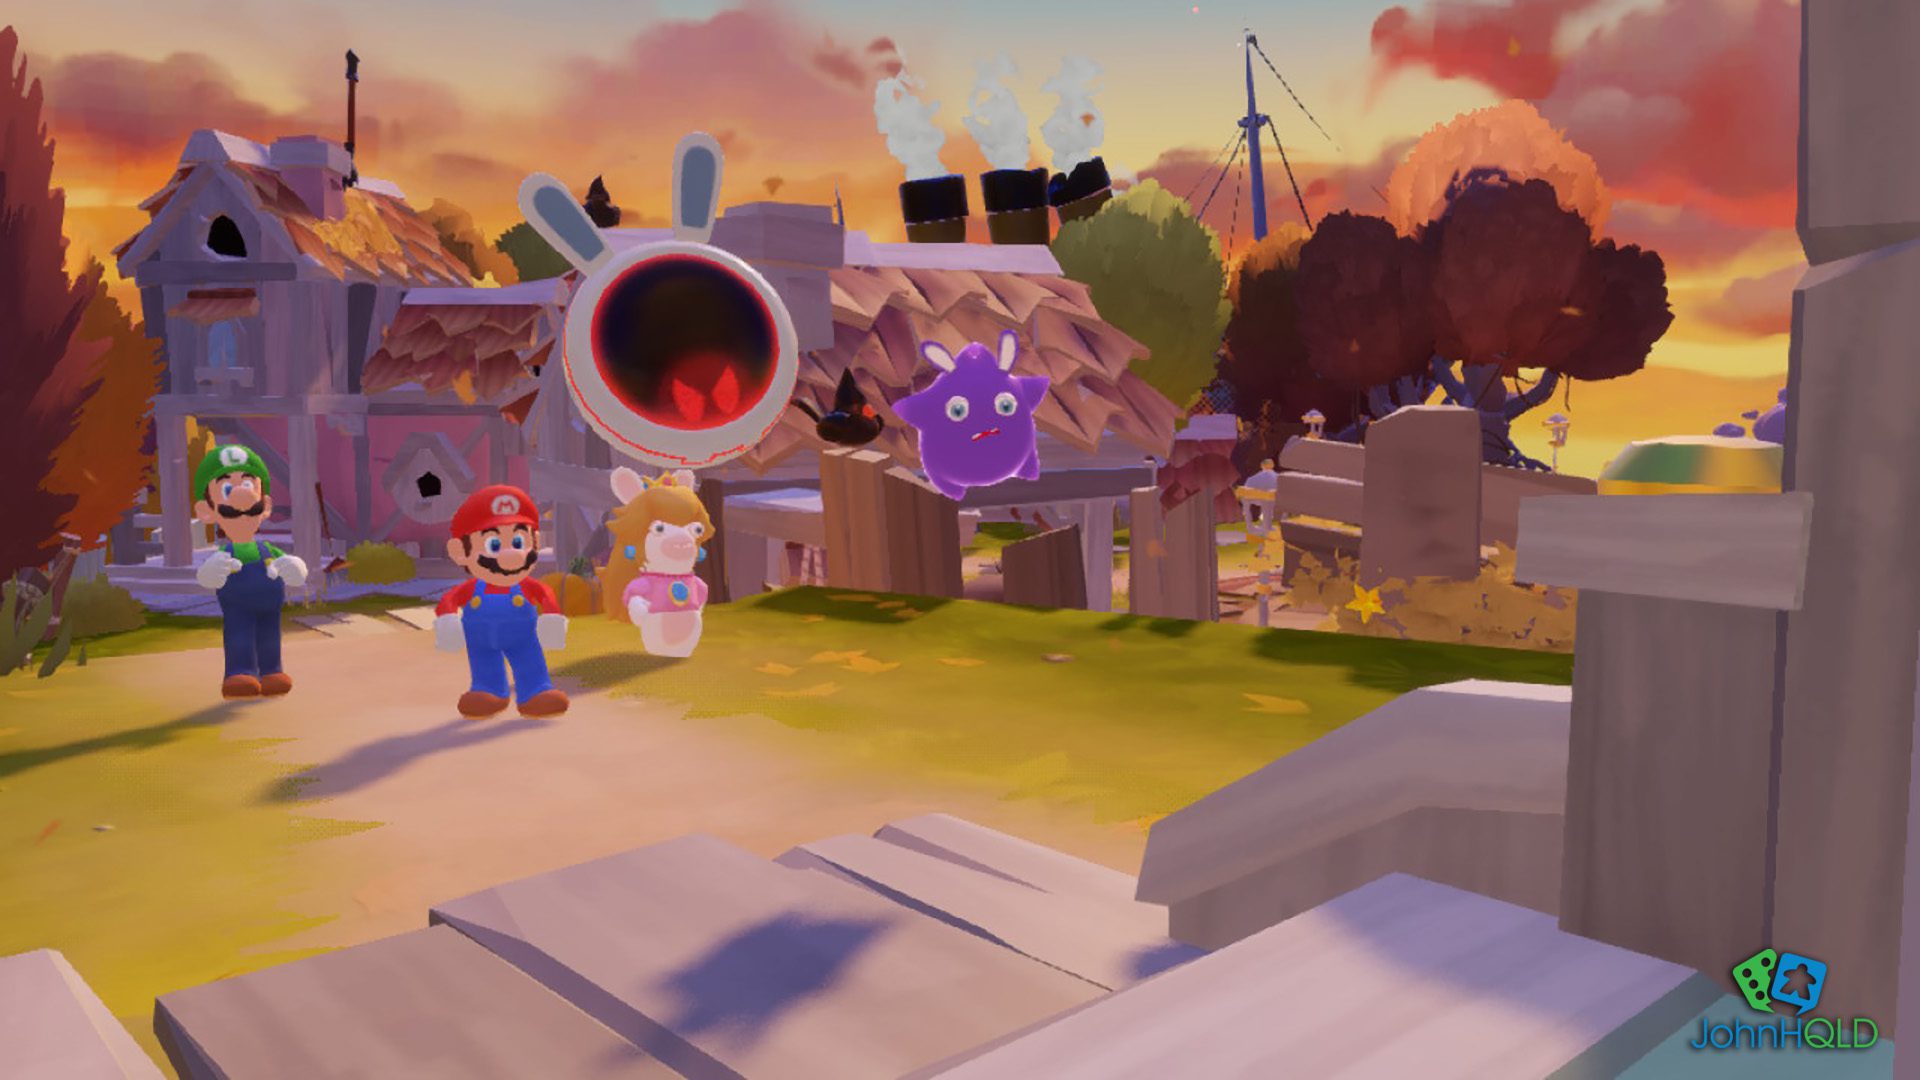 20221031 - Mario Rabbids Sparks of Hope - Exploration is optional but not everyone is always happy about that